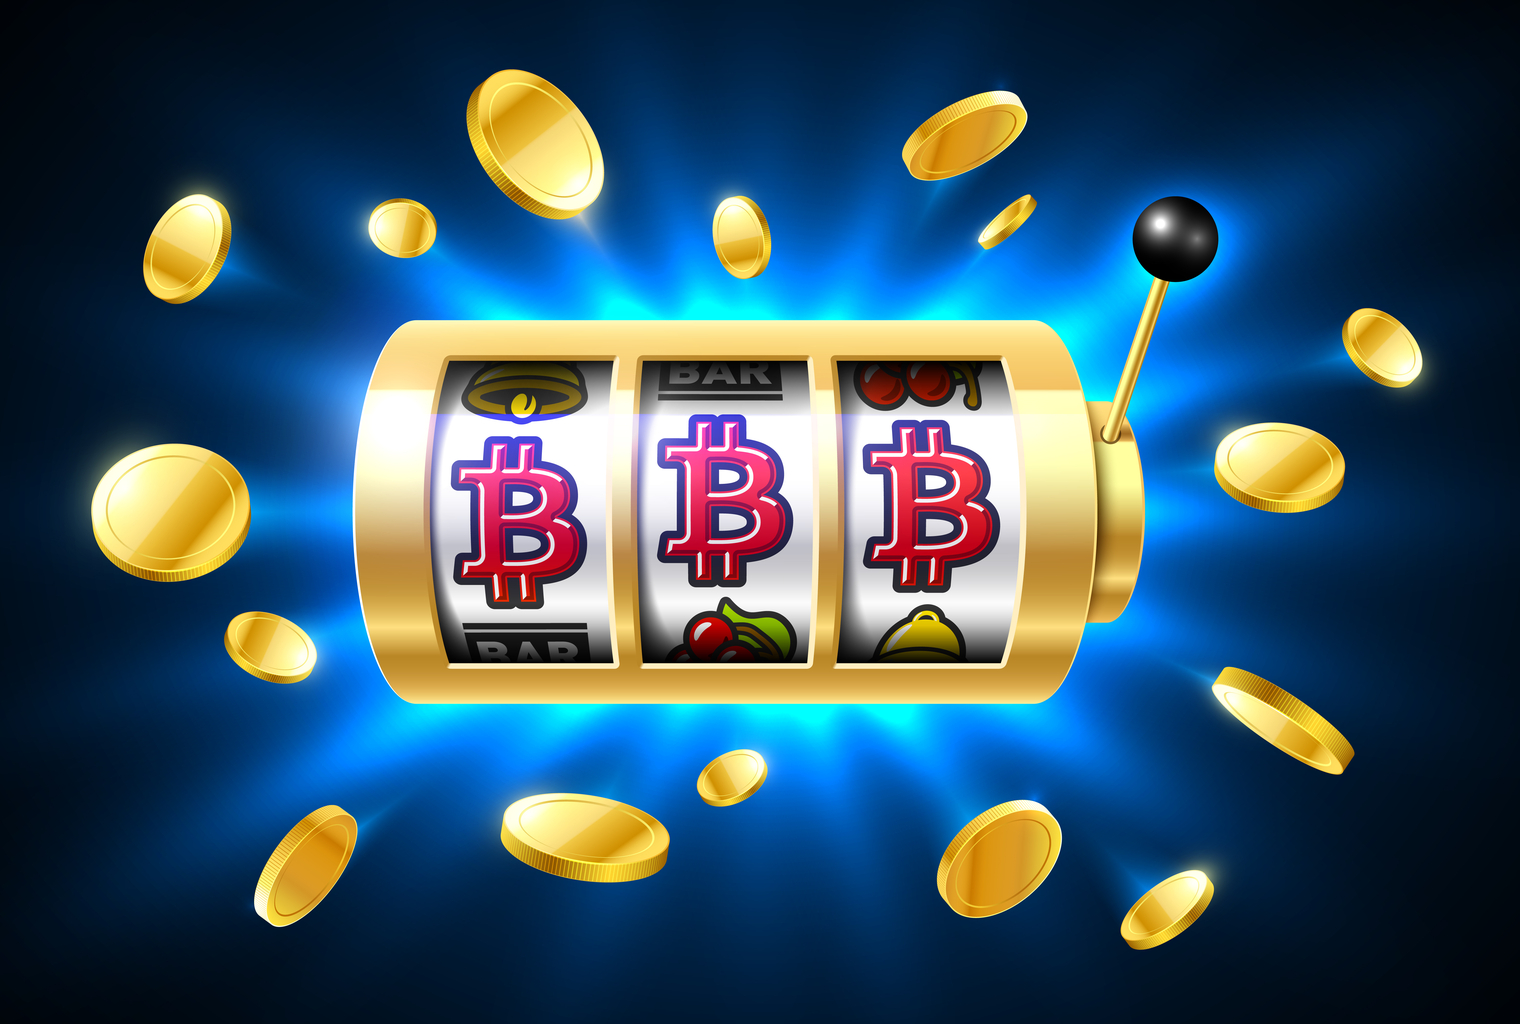 Play bitcoin slots for real money with no deposit